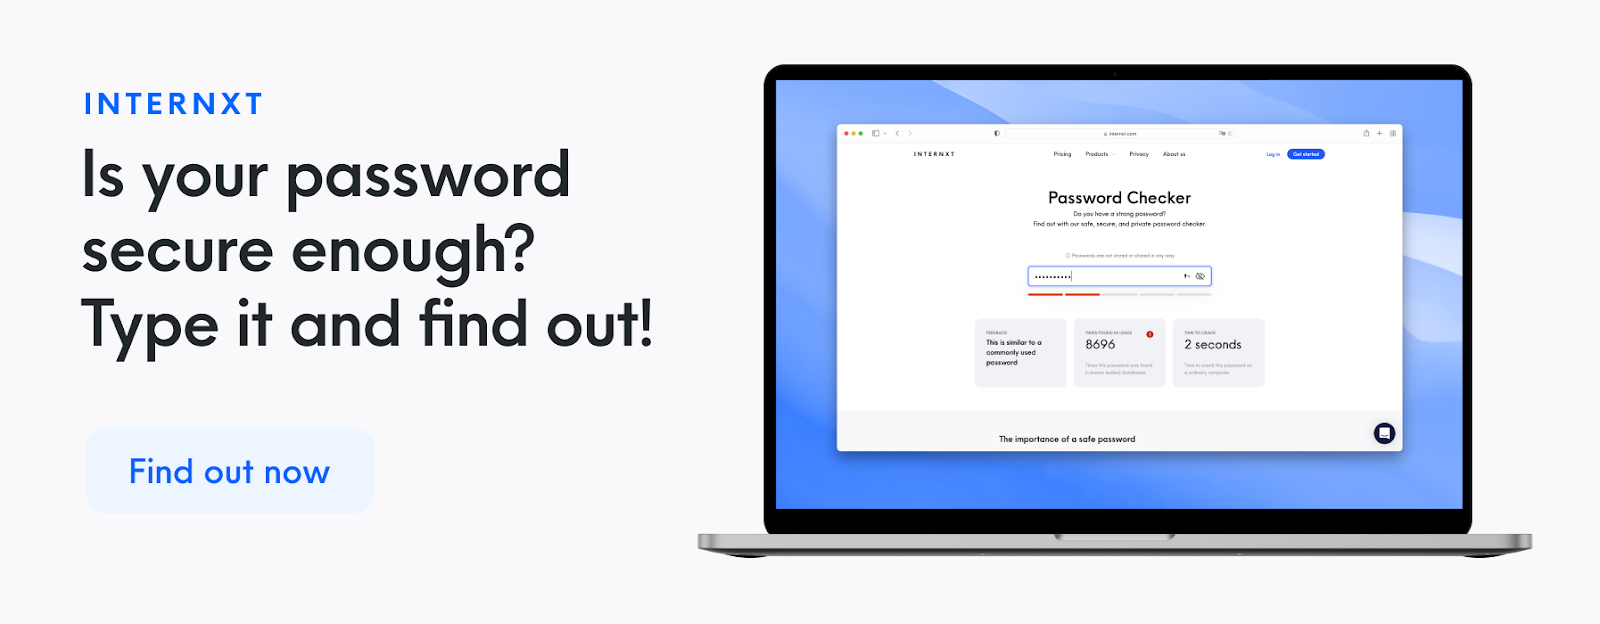 Internxt password checker is a secure way to set passwords